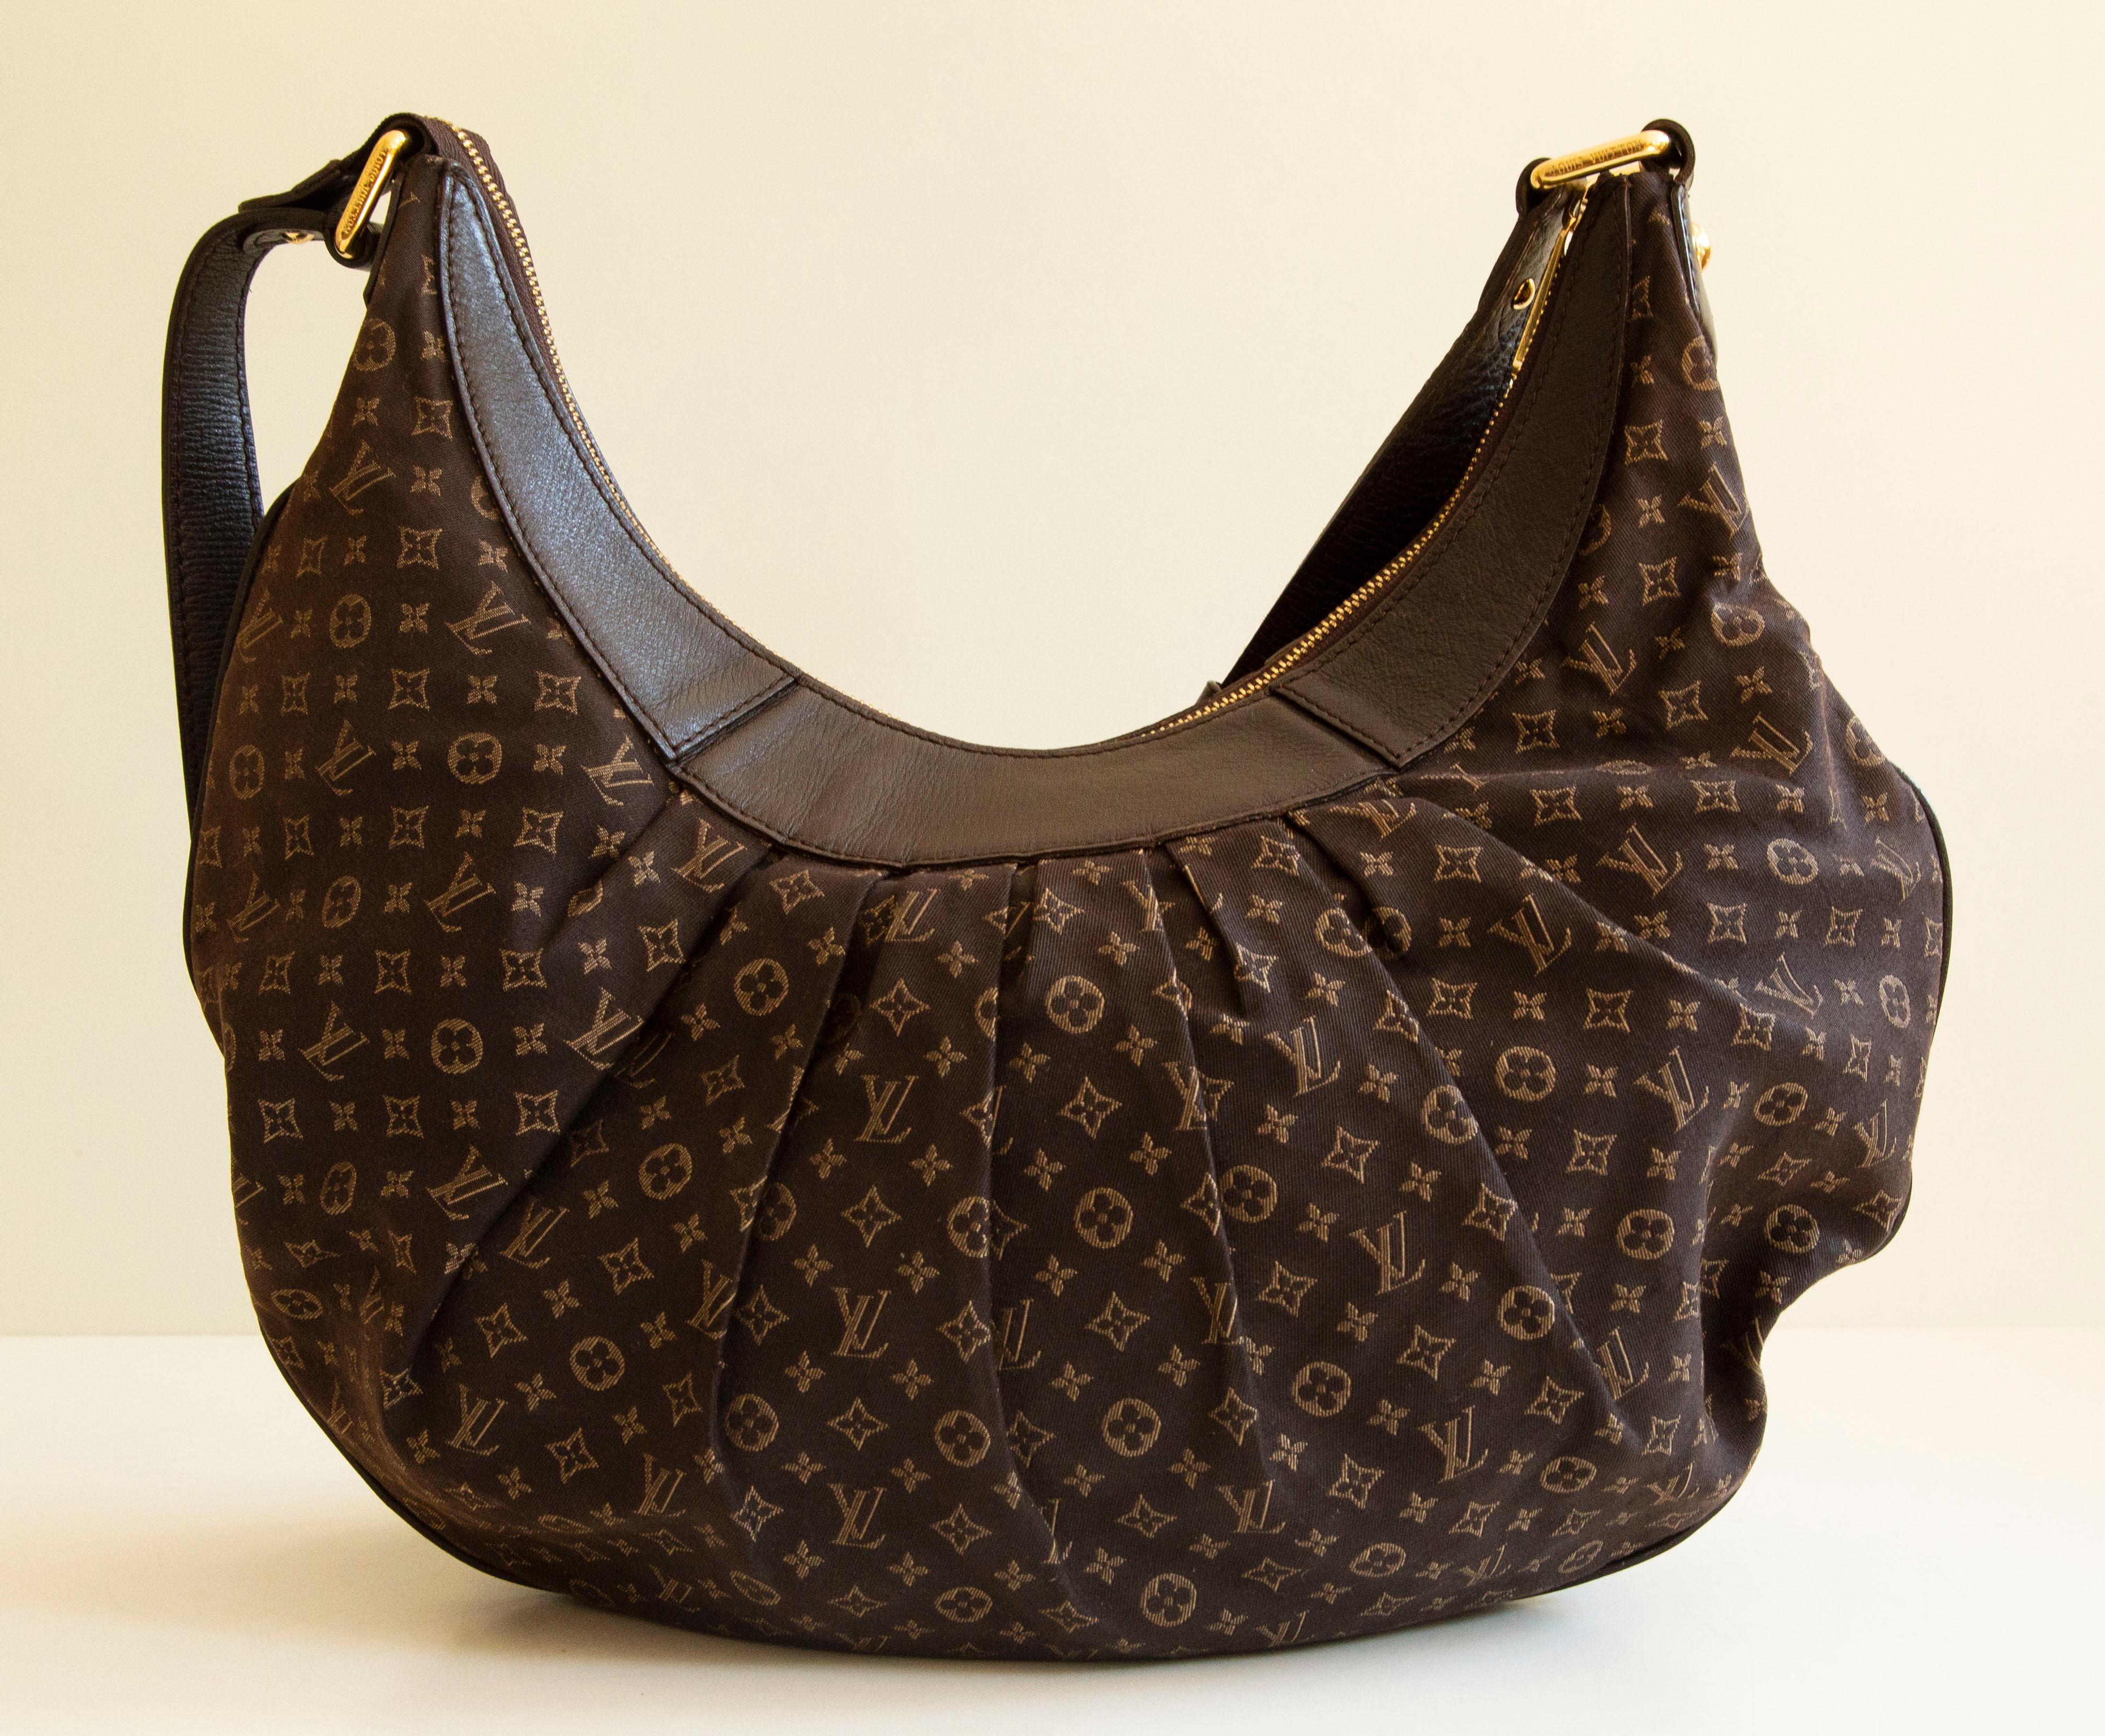 An authentic Louis Vuitton Rhapsody MM. The bag features an Idylle Monogram canvas, brown leather trim, and gold-toned hardware. The interior is lined with brown fabric and there are two slip pockets inside. The interior is neat & clean. The